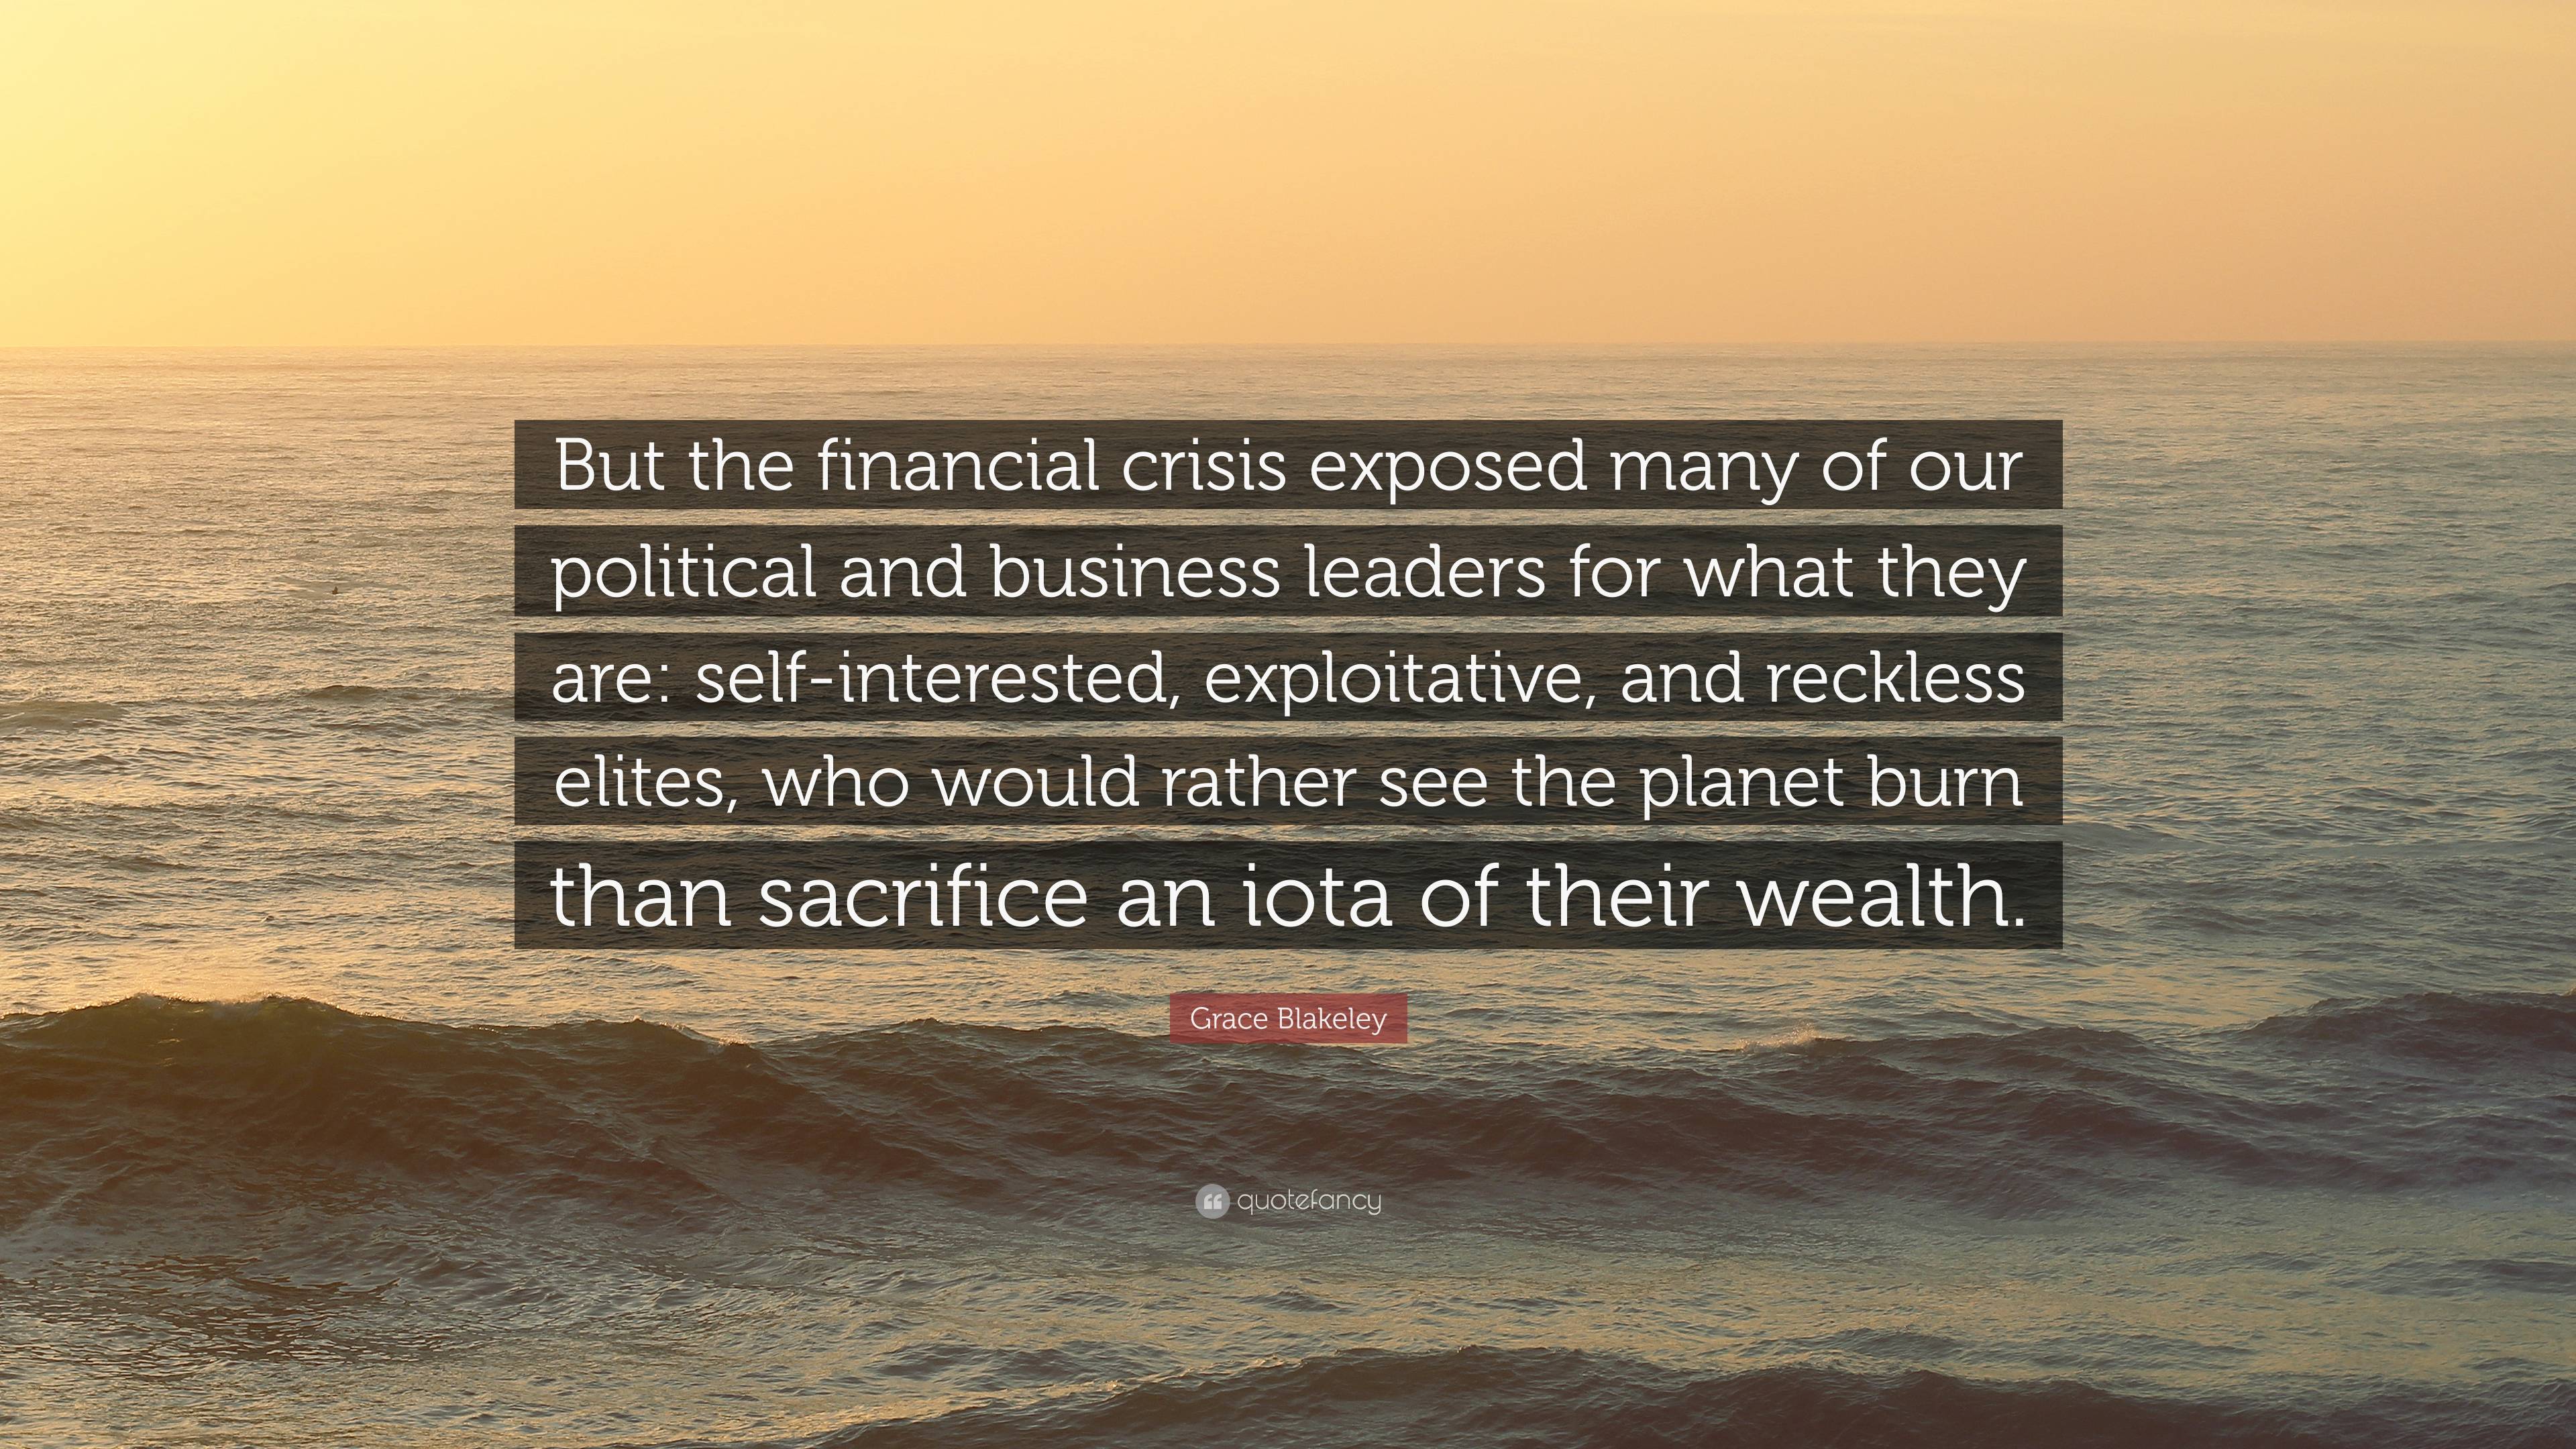 Grace Blakeley Quote: “But the financial crisis exposed many of our ...